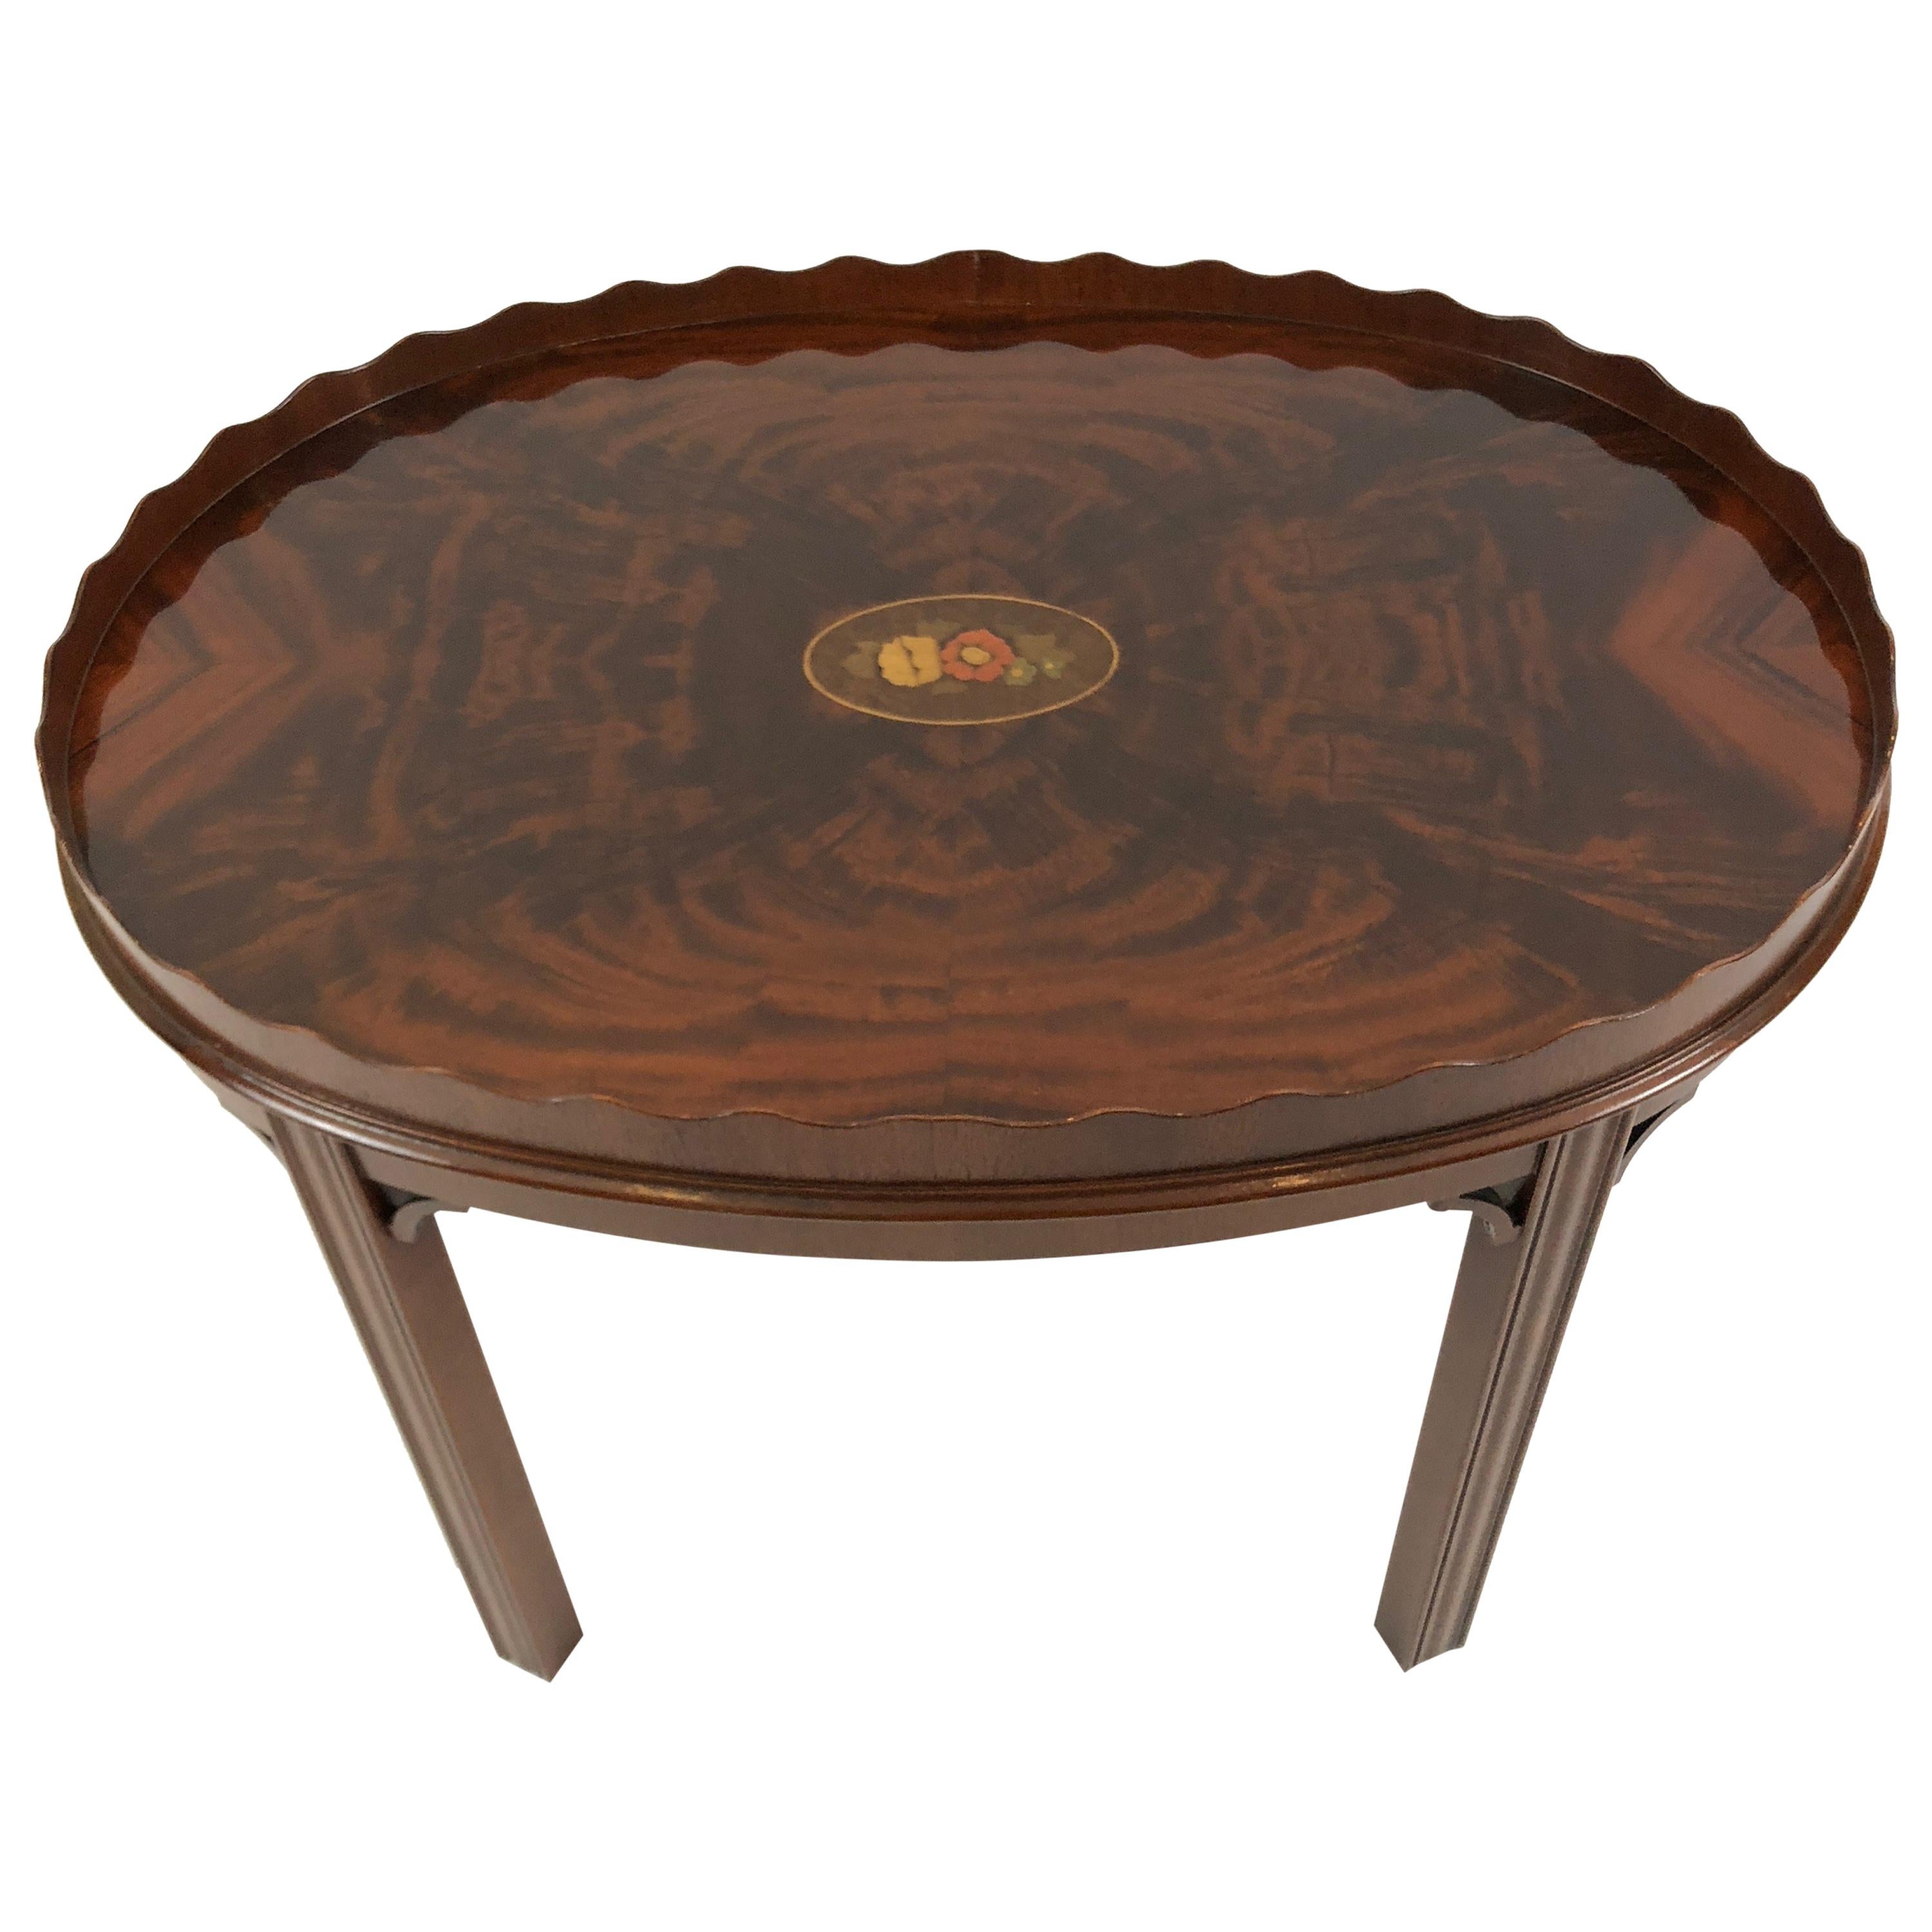 Very Pretty Small Oval Flame Mahogany Coffee Table or Side Table by Councill